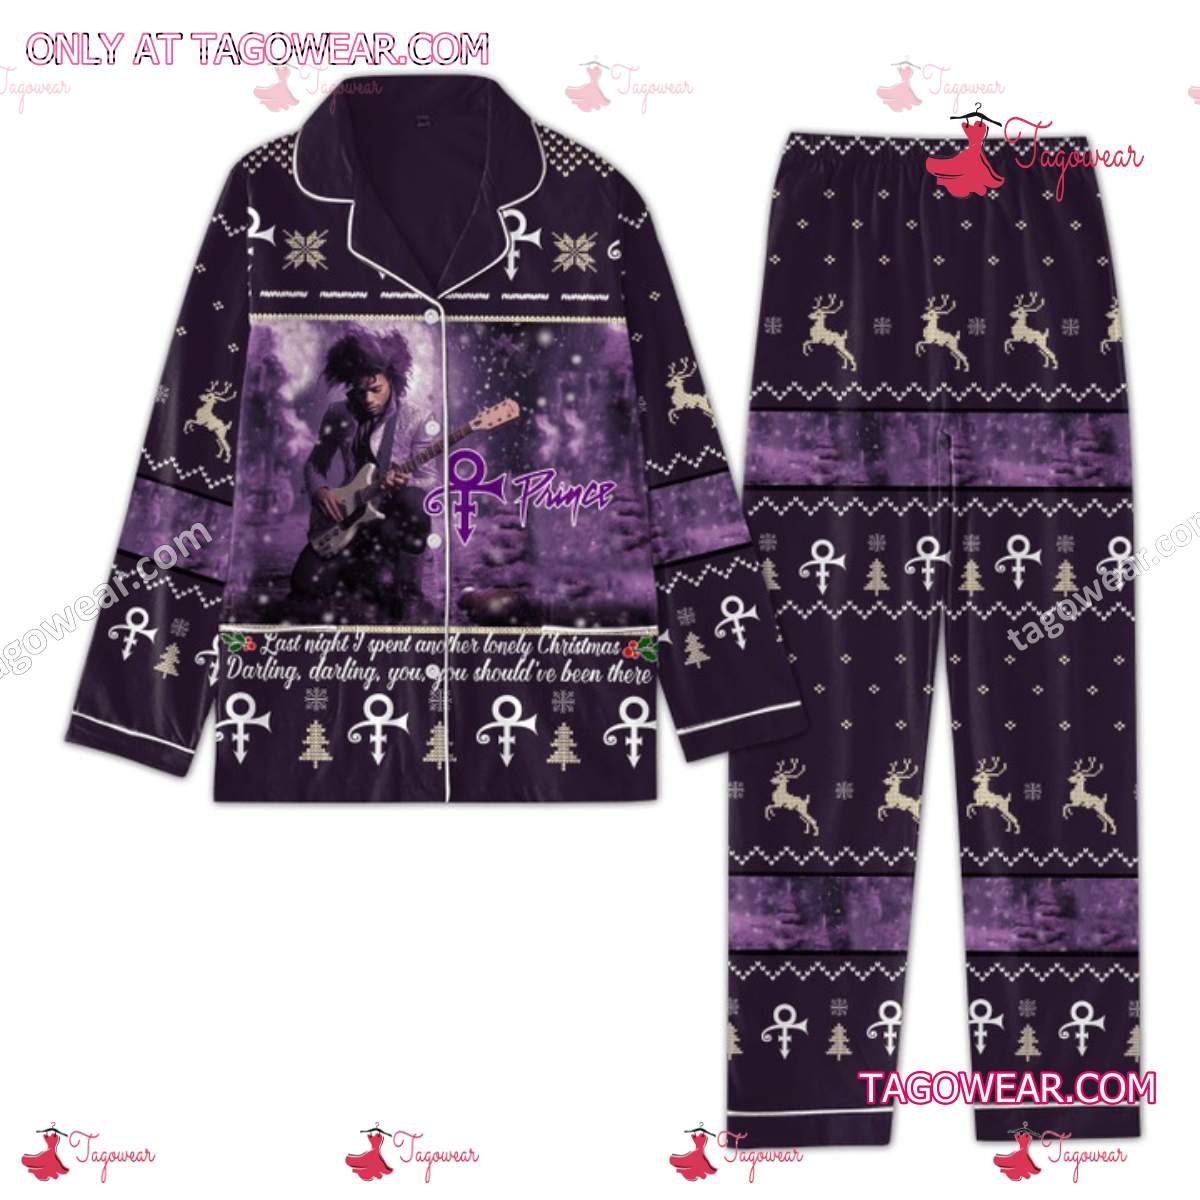 Prince Last Night I Spent Another Lonely Christmas Ugly Women Pajamas Set a